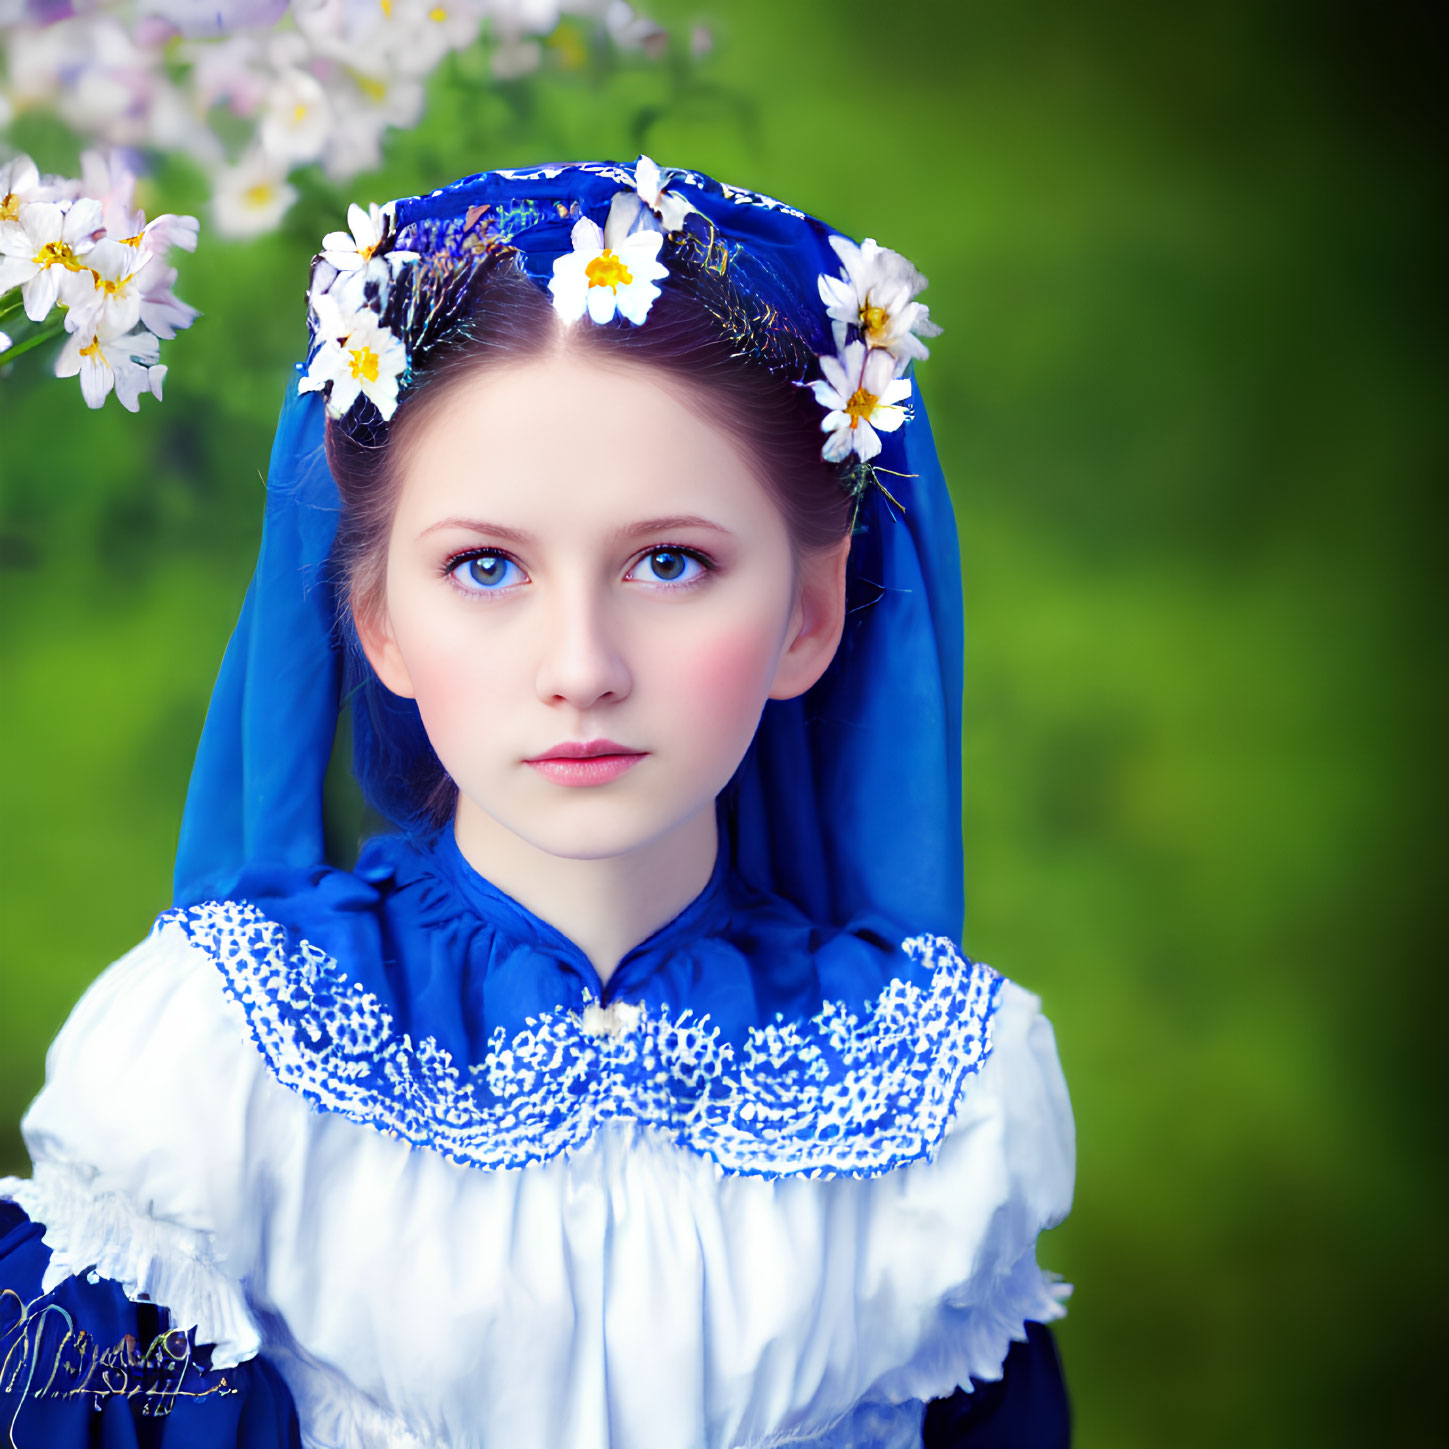 Young woman with blue eyes in blue and white dress and headscarf with flowers on green background